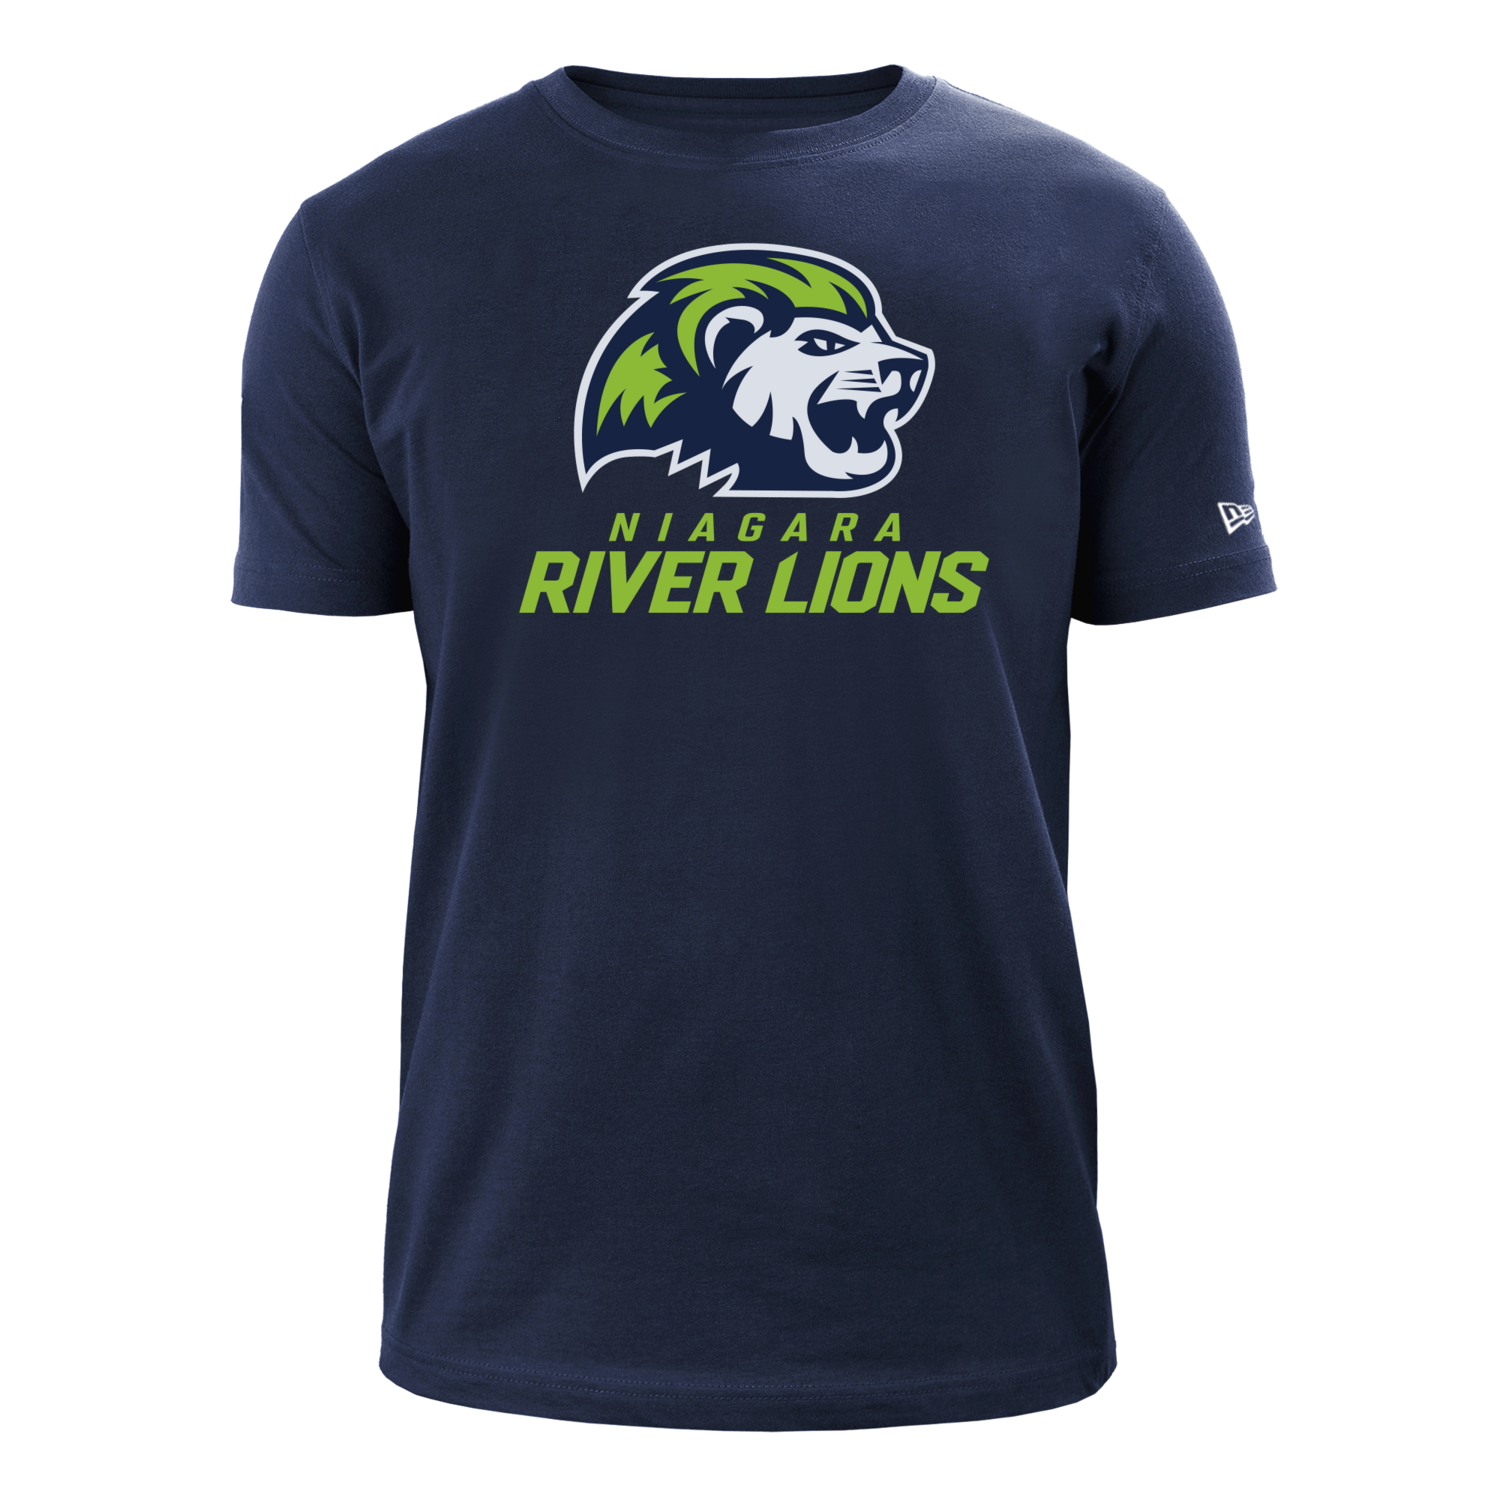 Niagara River Lions Adult Primary Tee